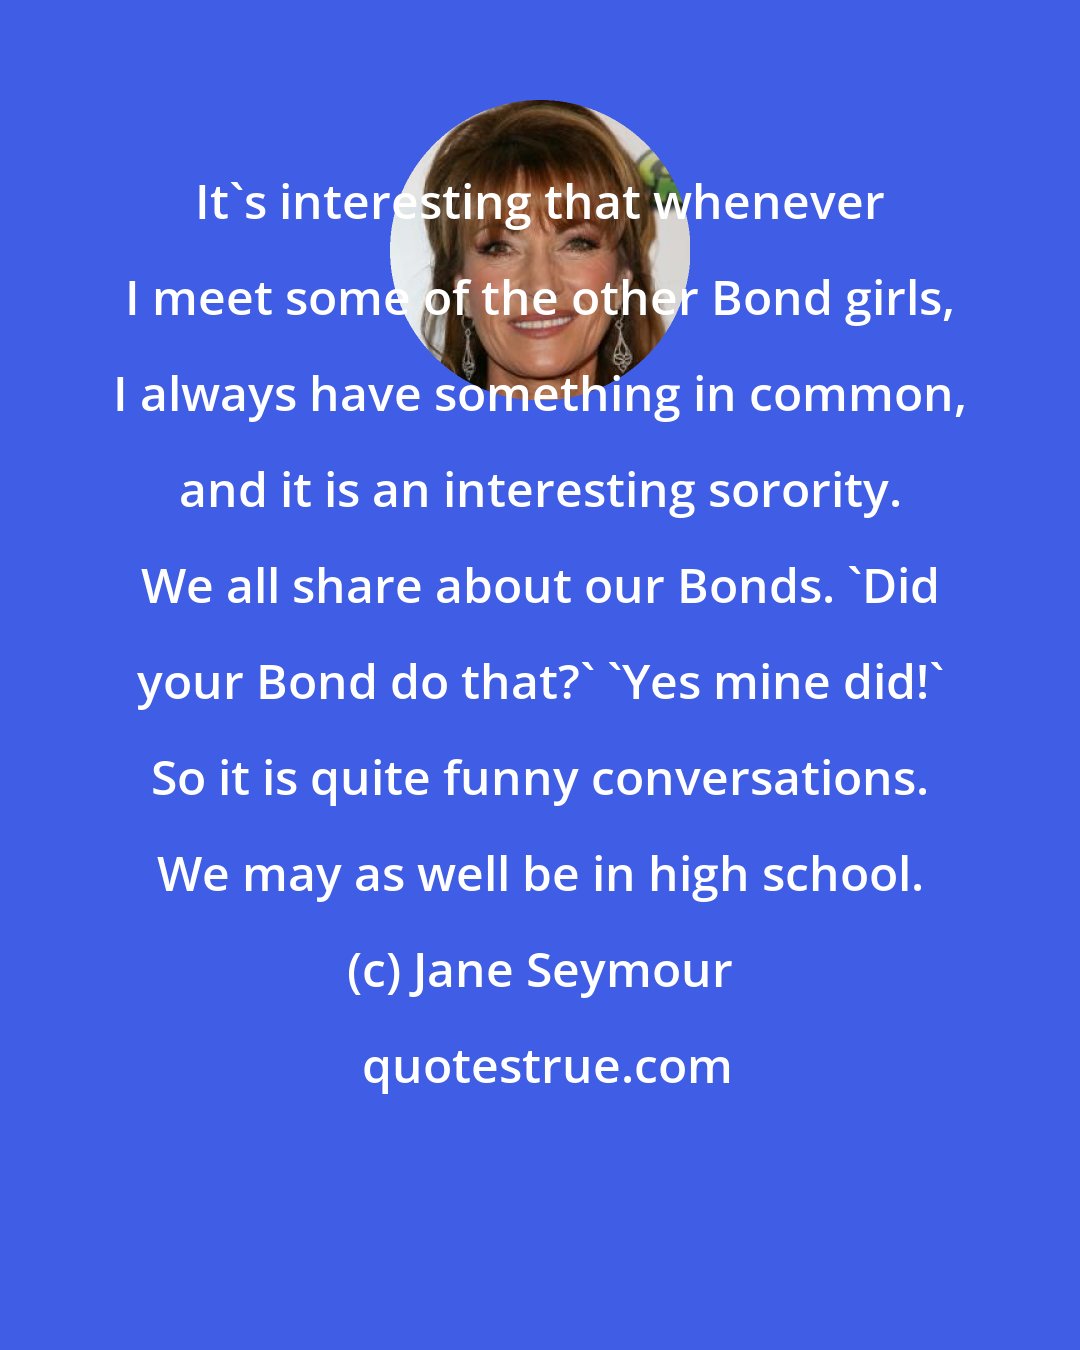 Jane Seymour: It's interesting that whenever I meet some of the other Bond girls, I always have something in common, and it is an interesting sorority. We all share about our Bonds. 'Did your Bond do that?' 'Yes mine did!' So it is quite funny conversations. We may as well be in high school.